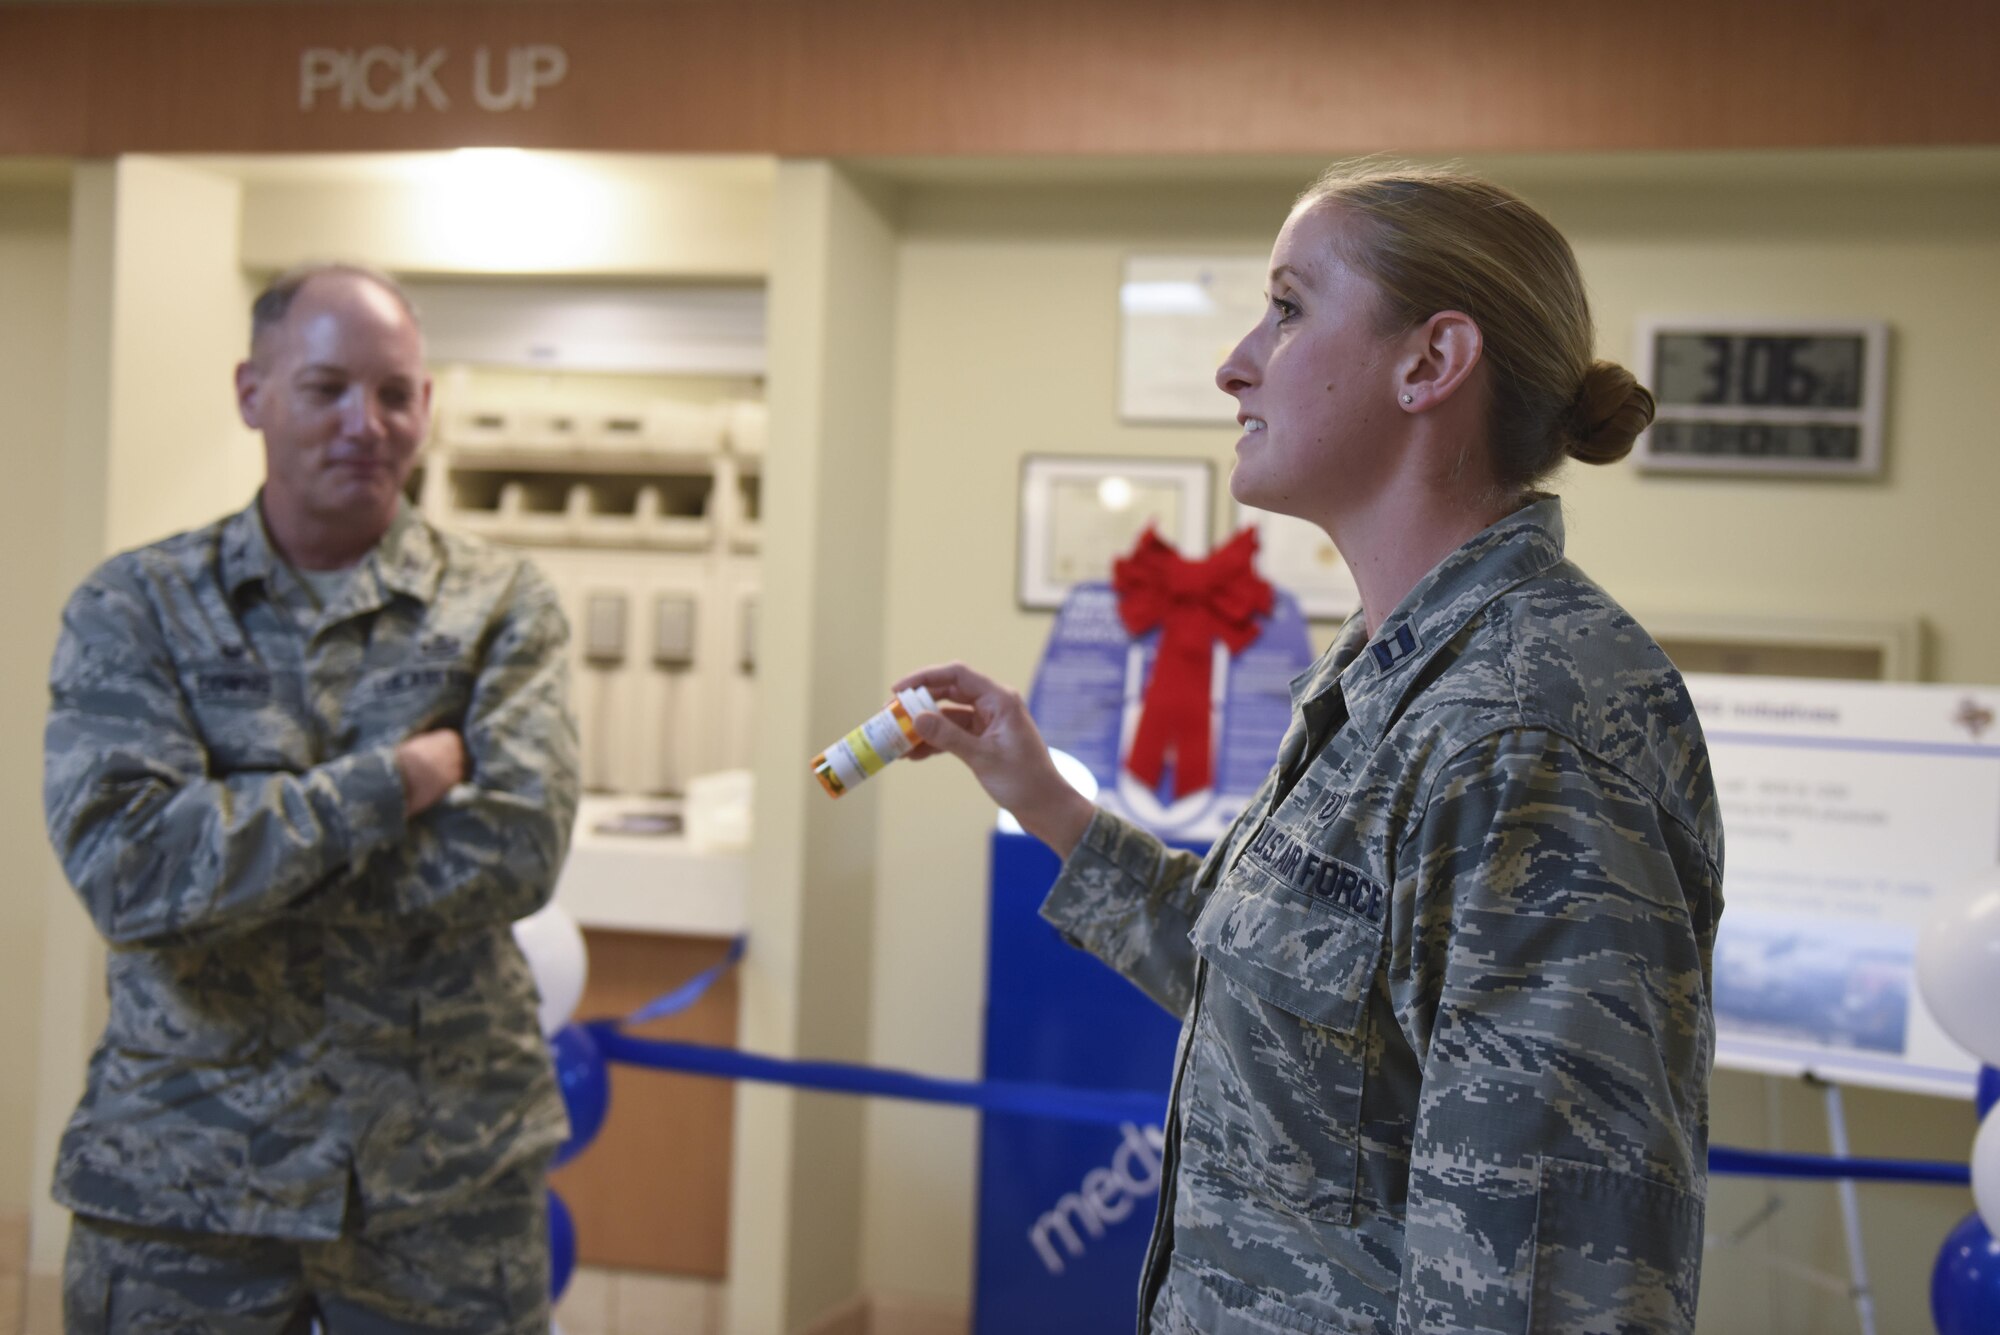 U.S. Air Force Col. Michael Downs, 17th Training Wing Commander, and Capt. Aubrie Wnek, 17th Medical Support Squadron pharmacy element chief, talk about the new capability to turn in unused prescription medication year round using the new medsafe drop box during a ribbon cutting ceremony at the Ross Medical Clinic Pharmacy on Goodfellow Air Force Base, Texas, June 13, 2016. Previously, the clinic hosted two prescription turn-ins a year. (U.S. Air Force photo by Airman 1st Class Chase Sousa/Released)